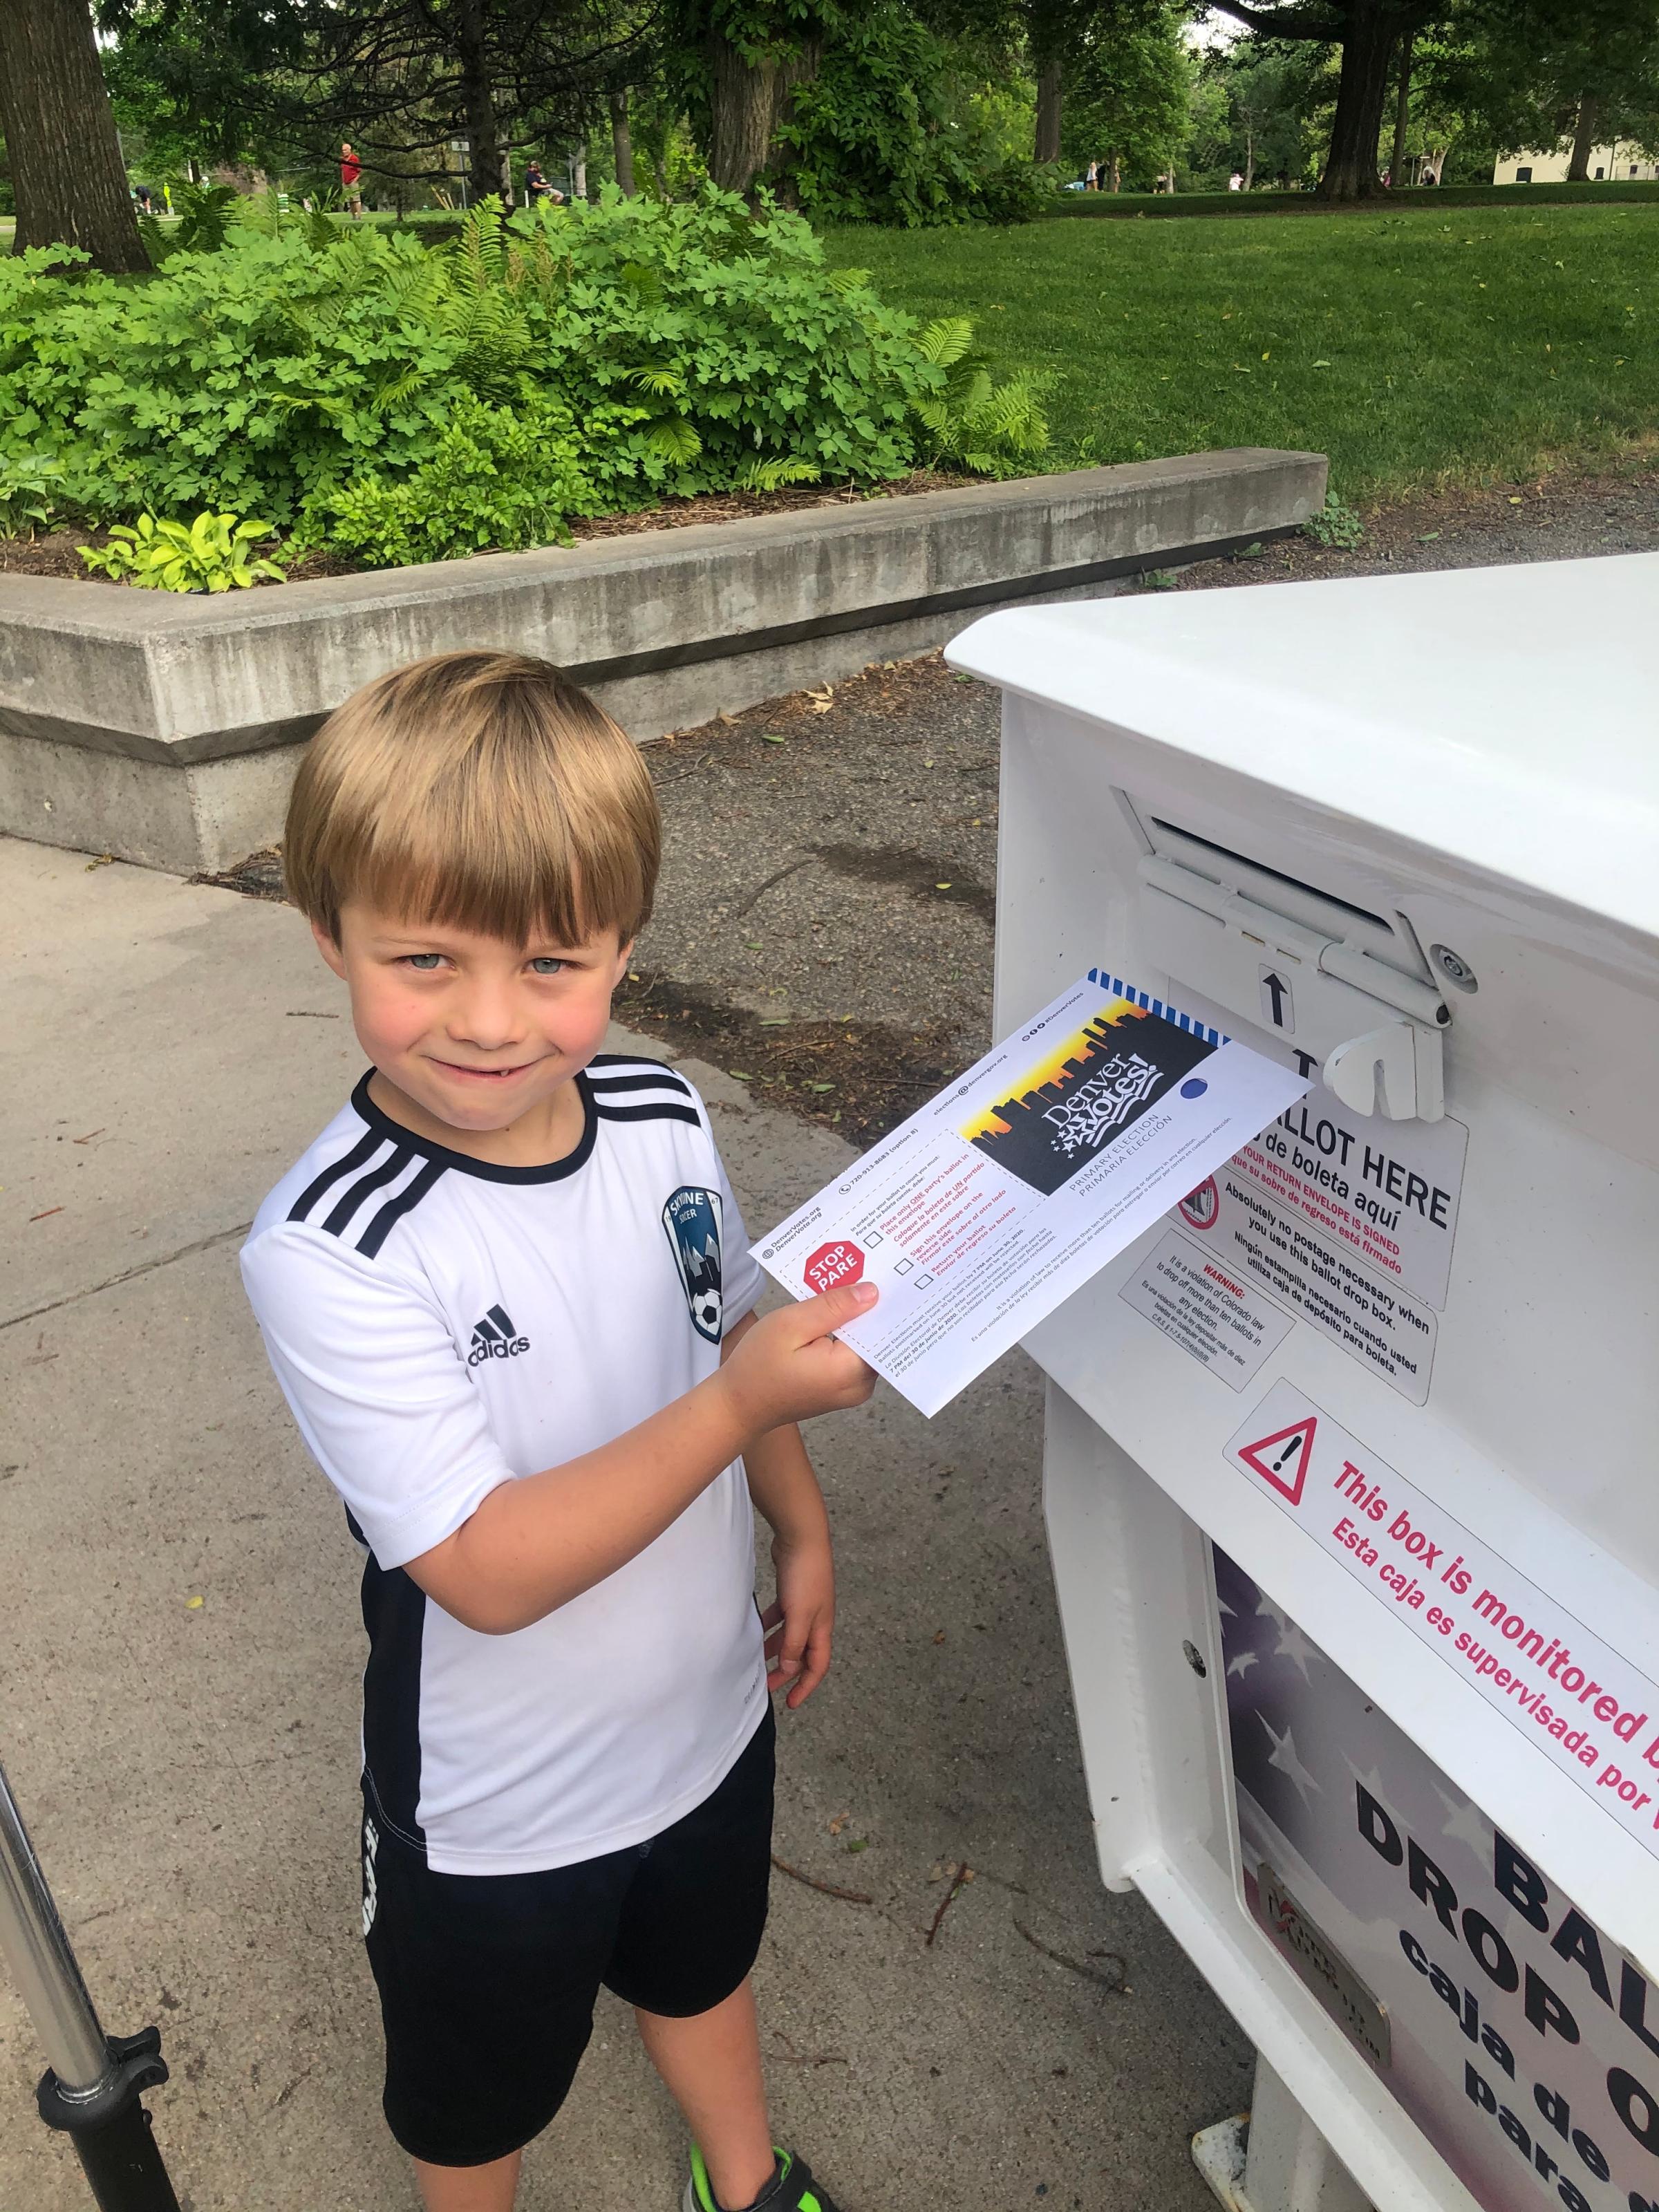 McReynolds' son Kenton, 7, helping her vote during Colorado's primary election this summer.